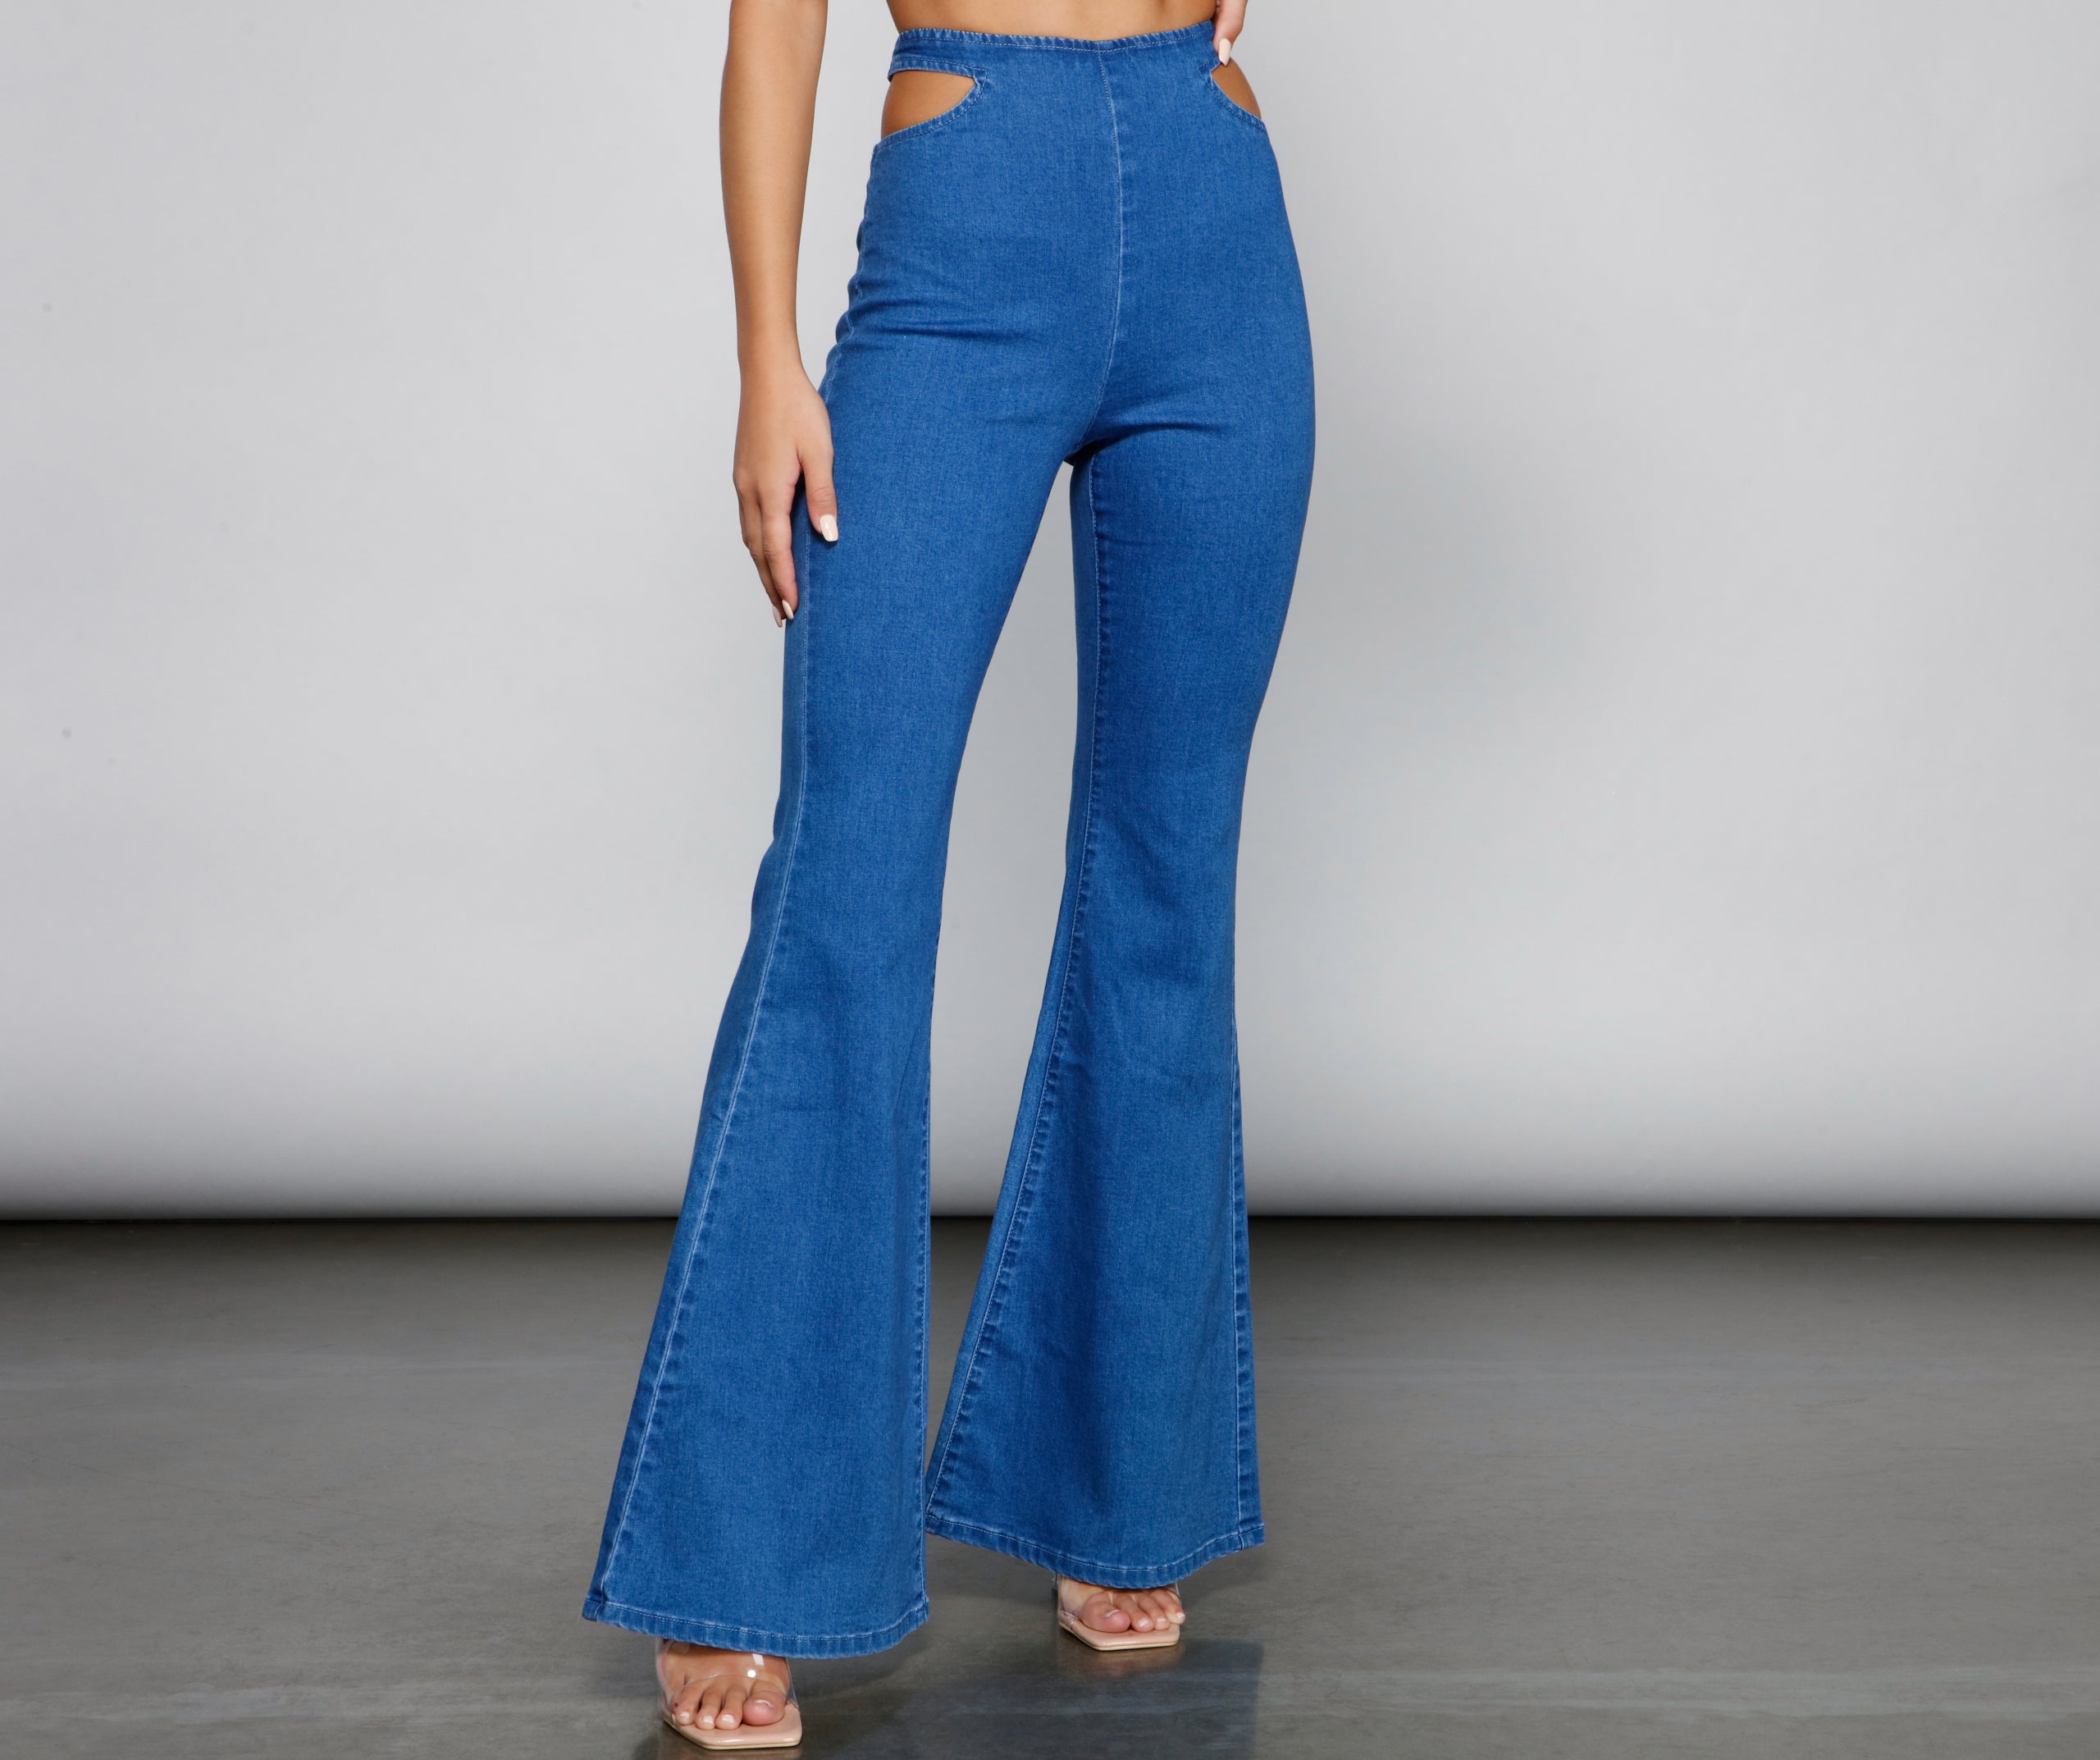 Bring The Flare Cutout Jeans